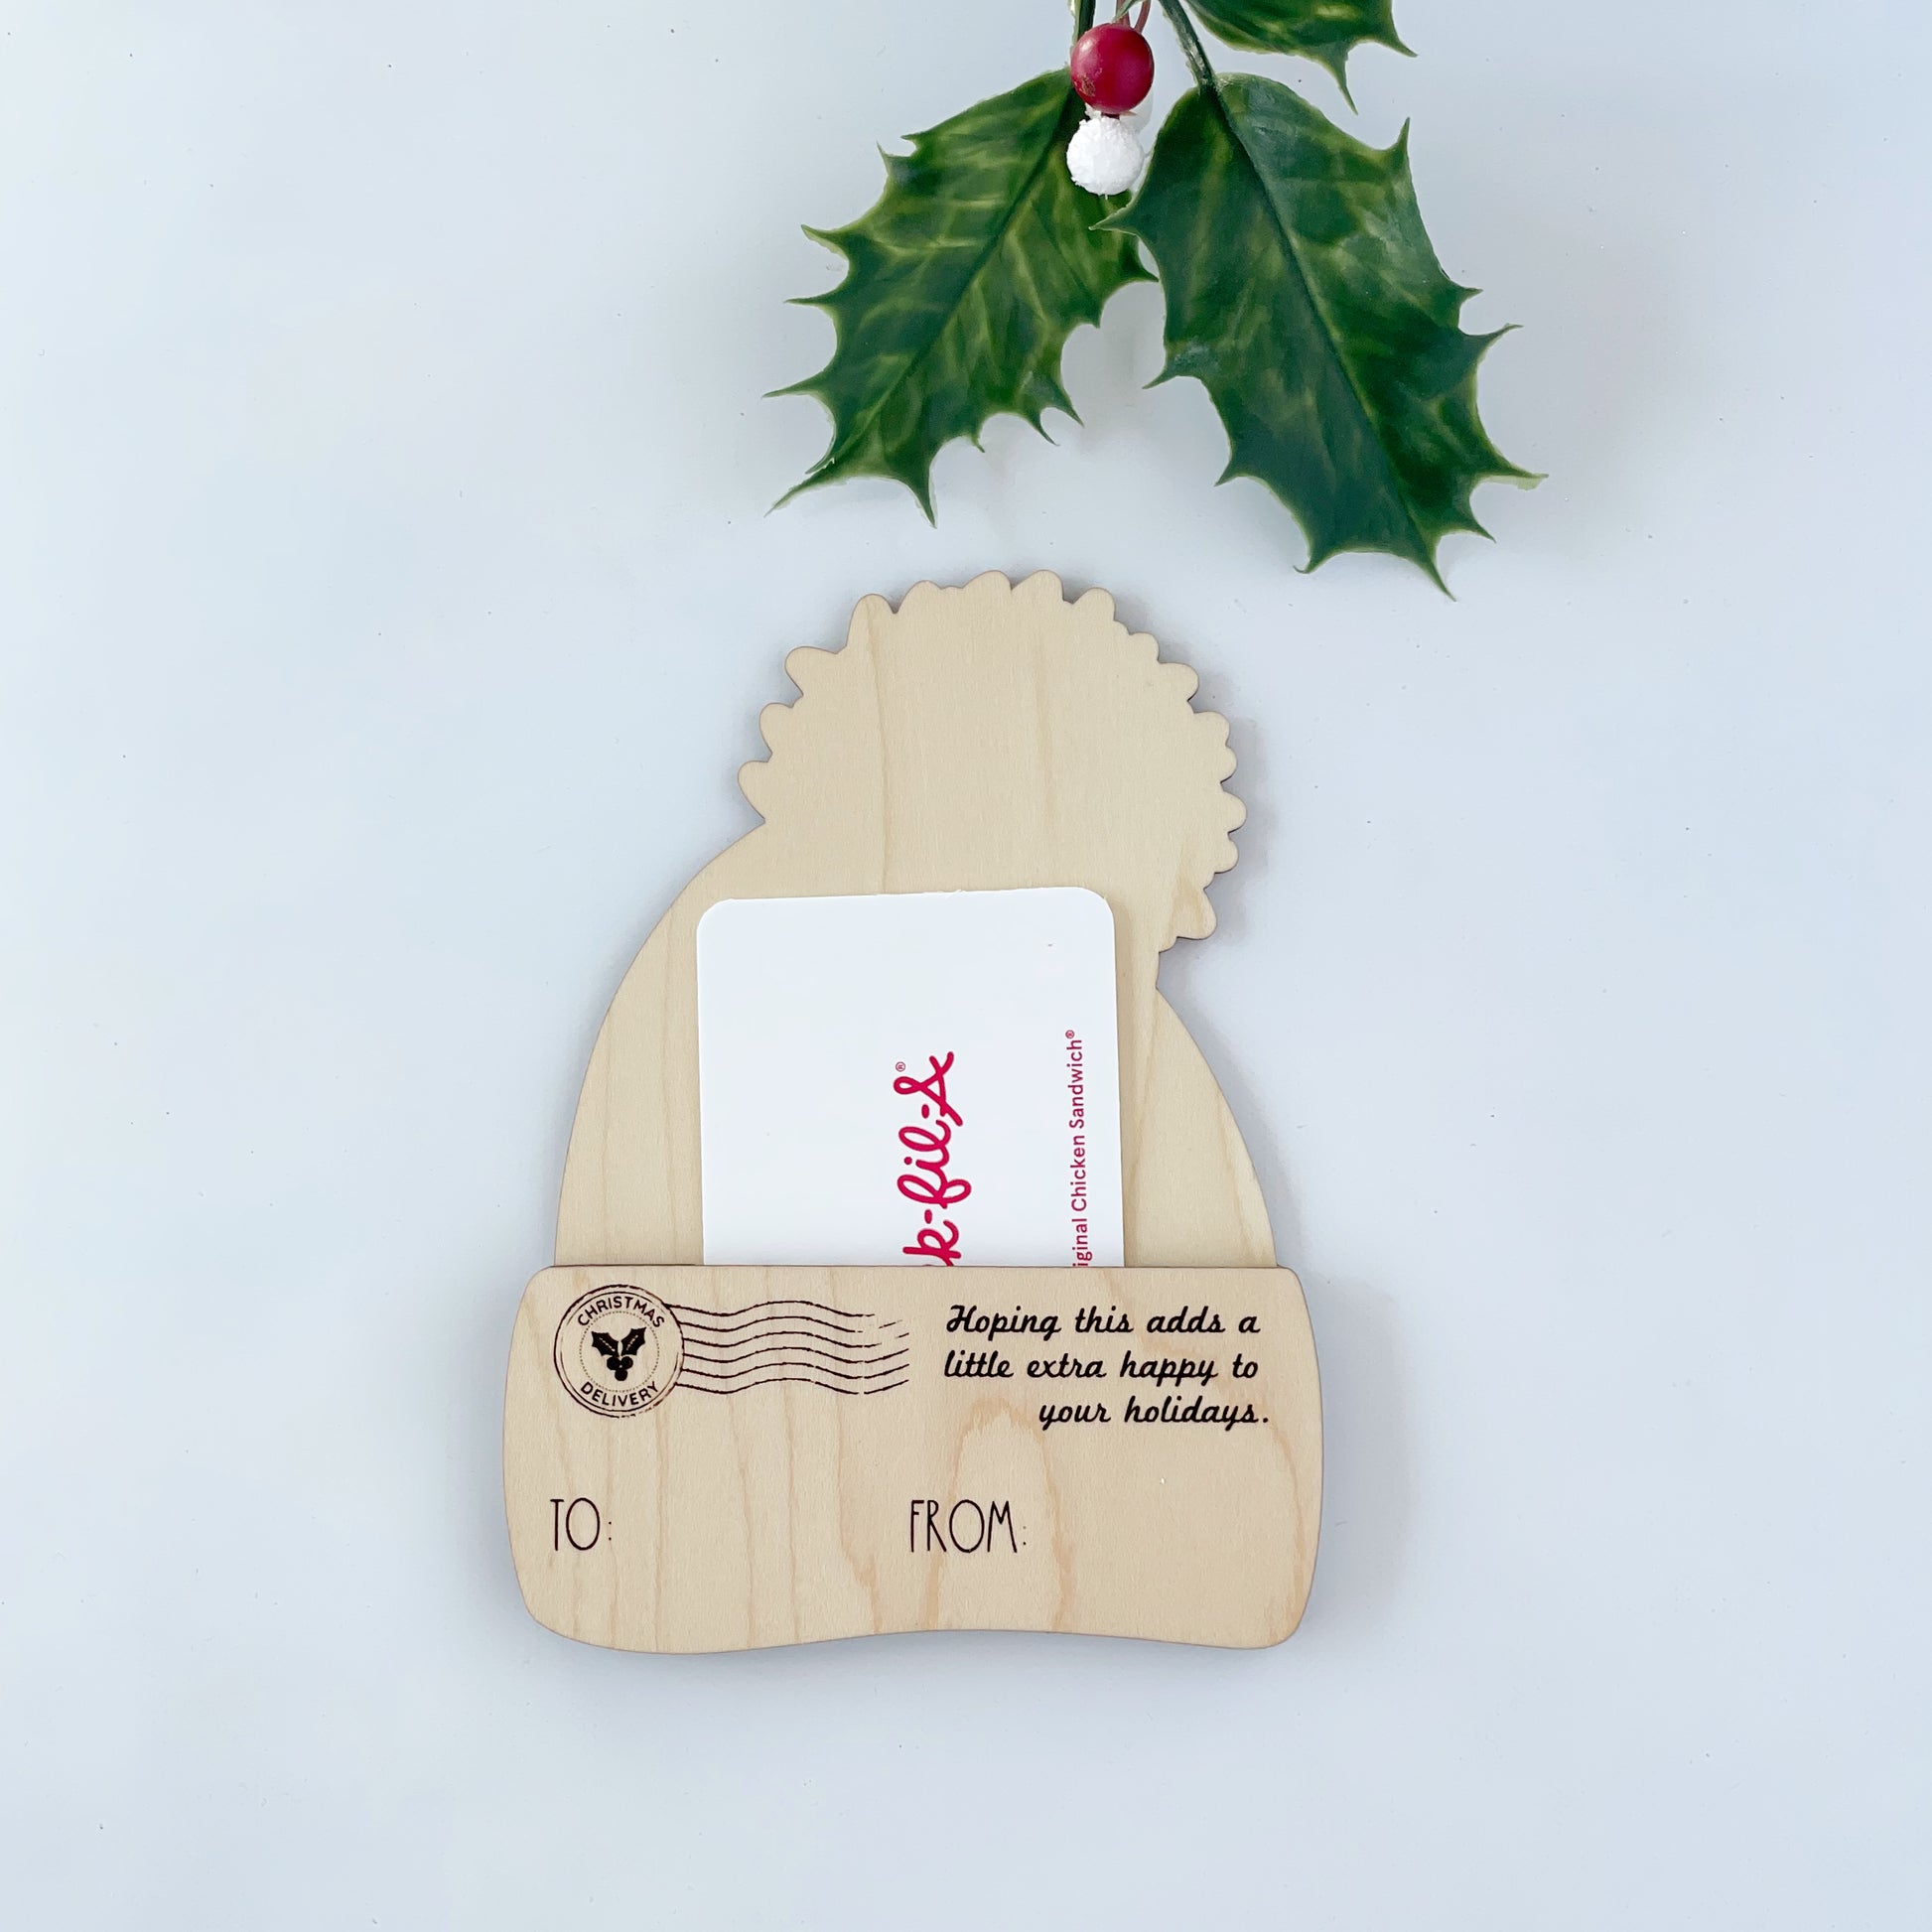 Customizable Winter Hat Gift Card/Money Holder and Christmas Ornament